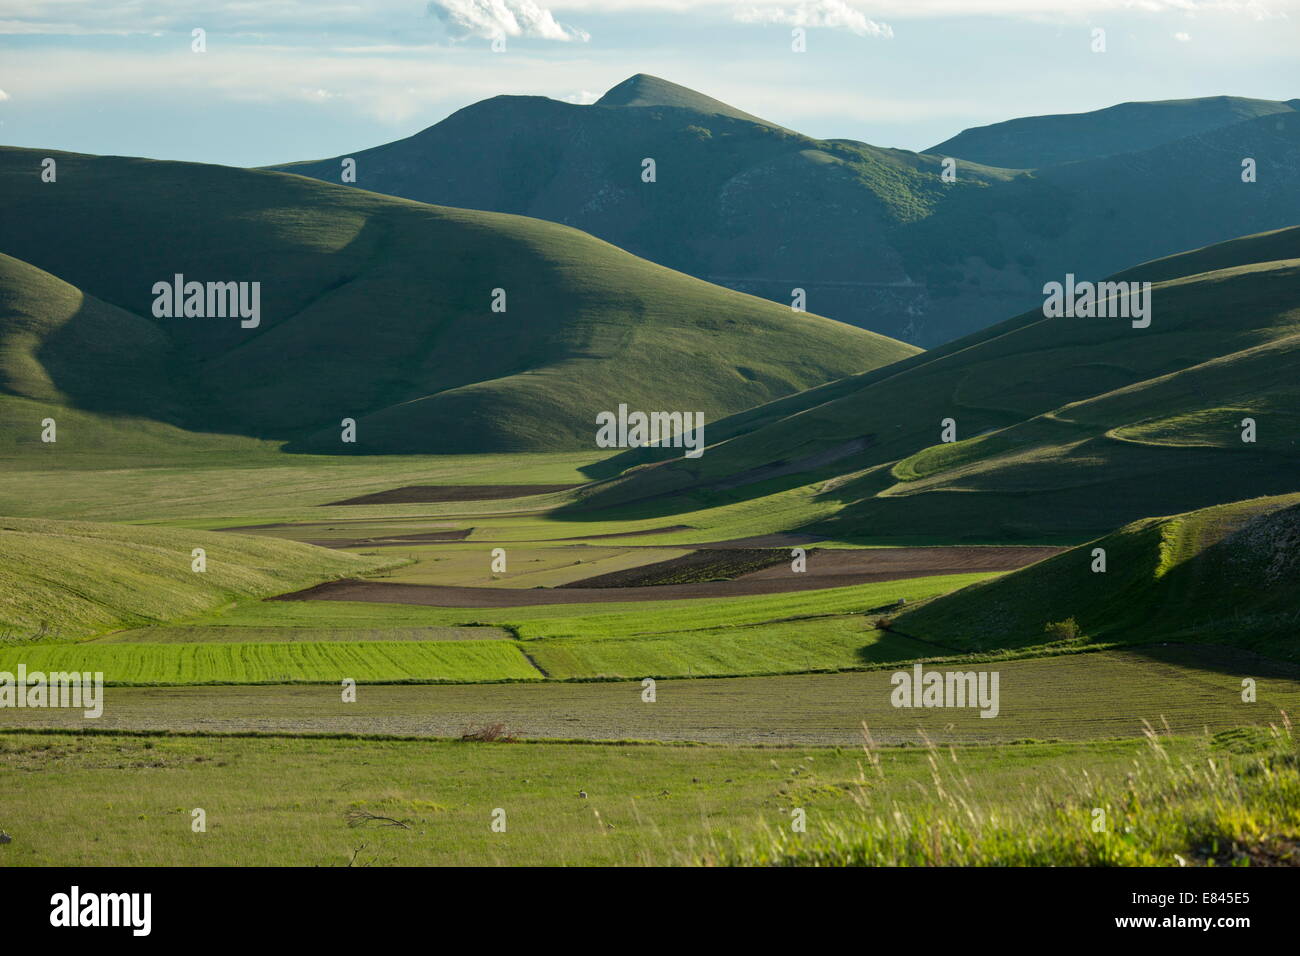 The Piano Grande - a large flat inwardly-draining plain - in spring, evening light; Monti Sibillini National Park, Italy. Stock Photo